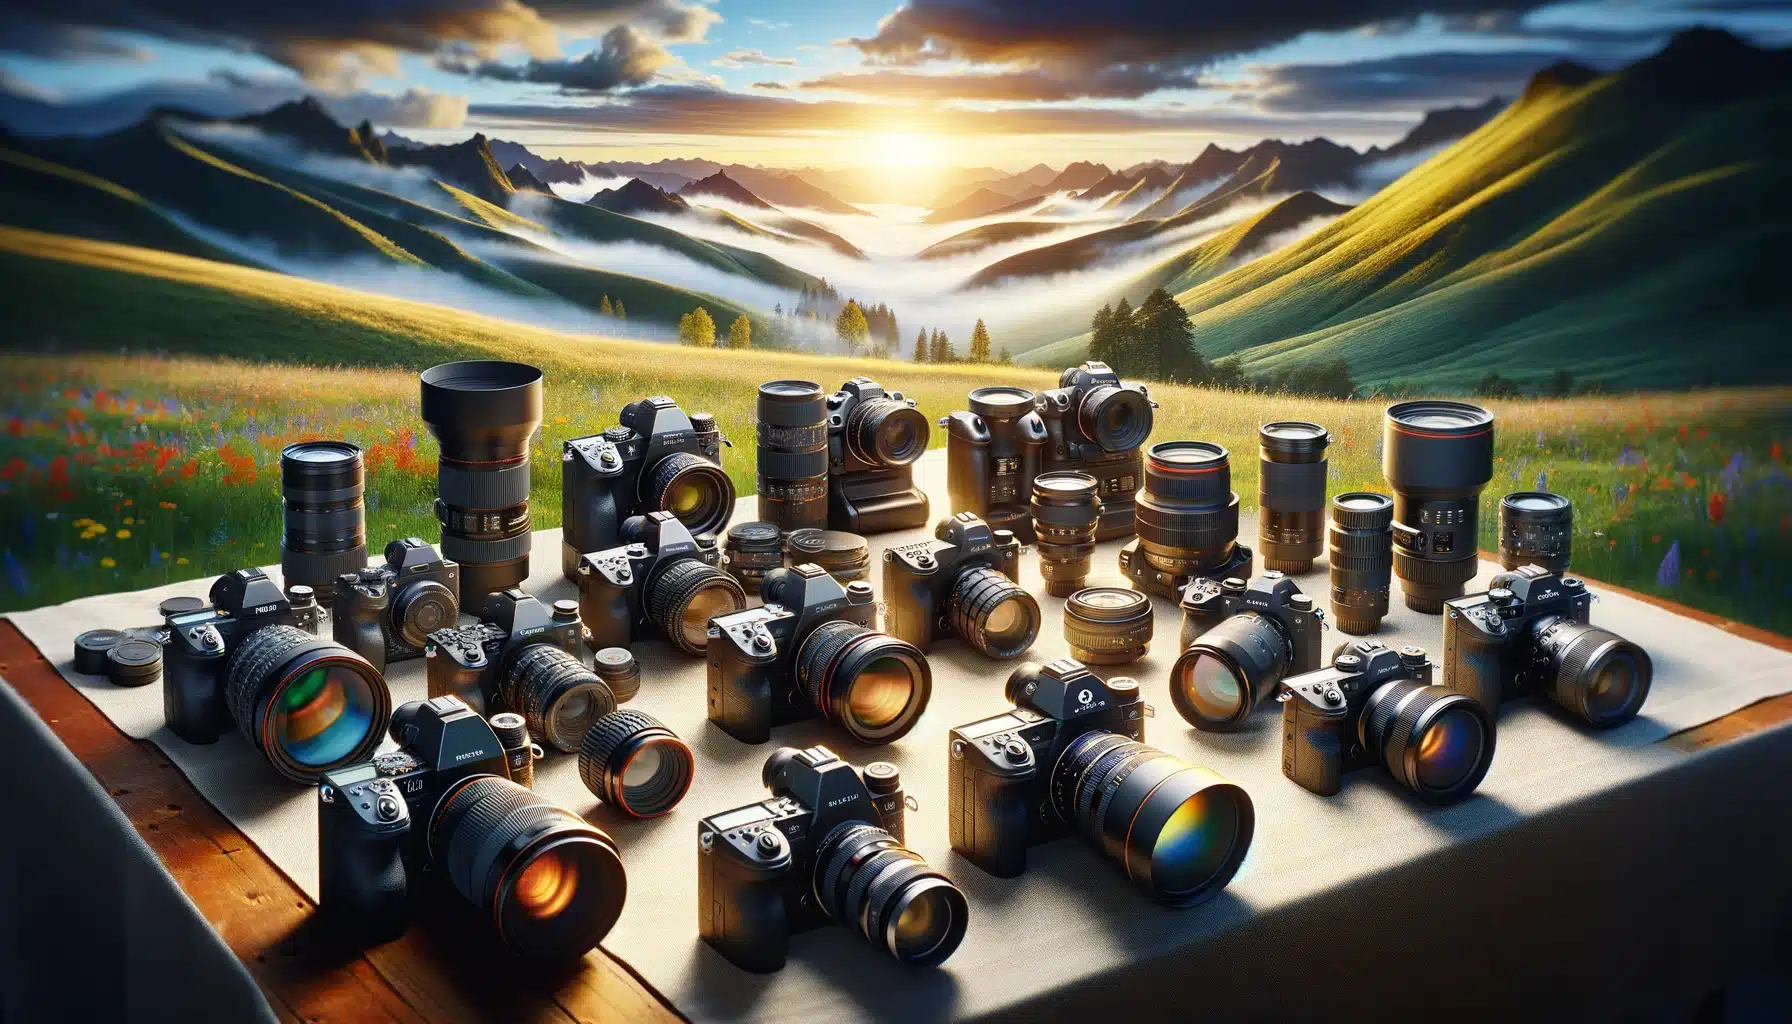 Array of high-end DSLR and mirrorless cameras on a table with a scenic backdrop.